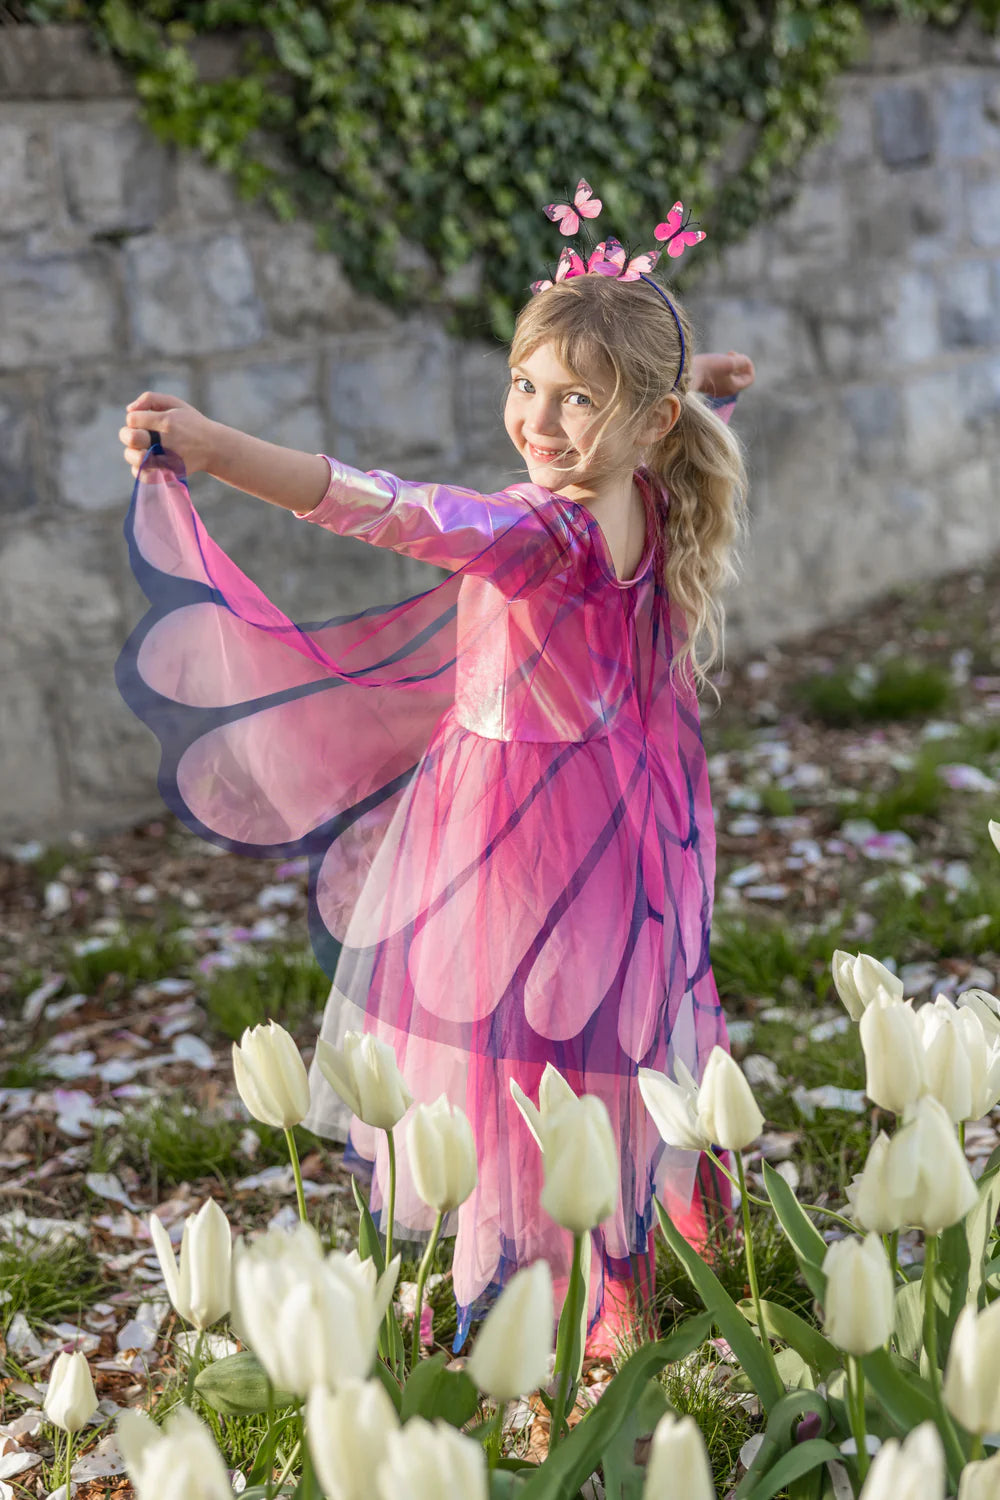 Butterfly Twirl Dress with Wings, Pink